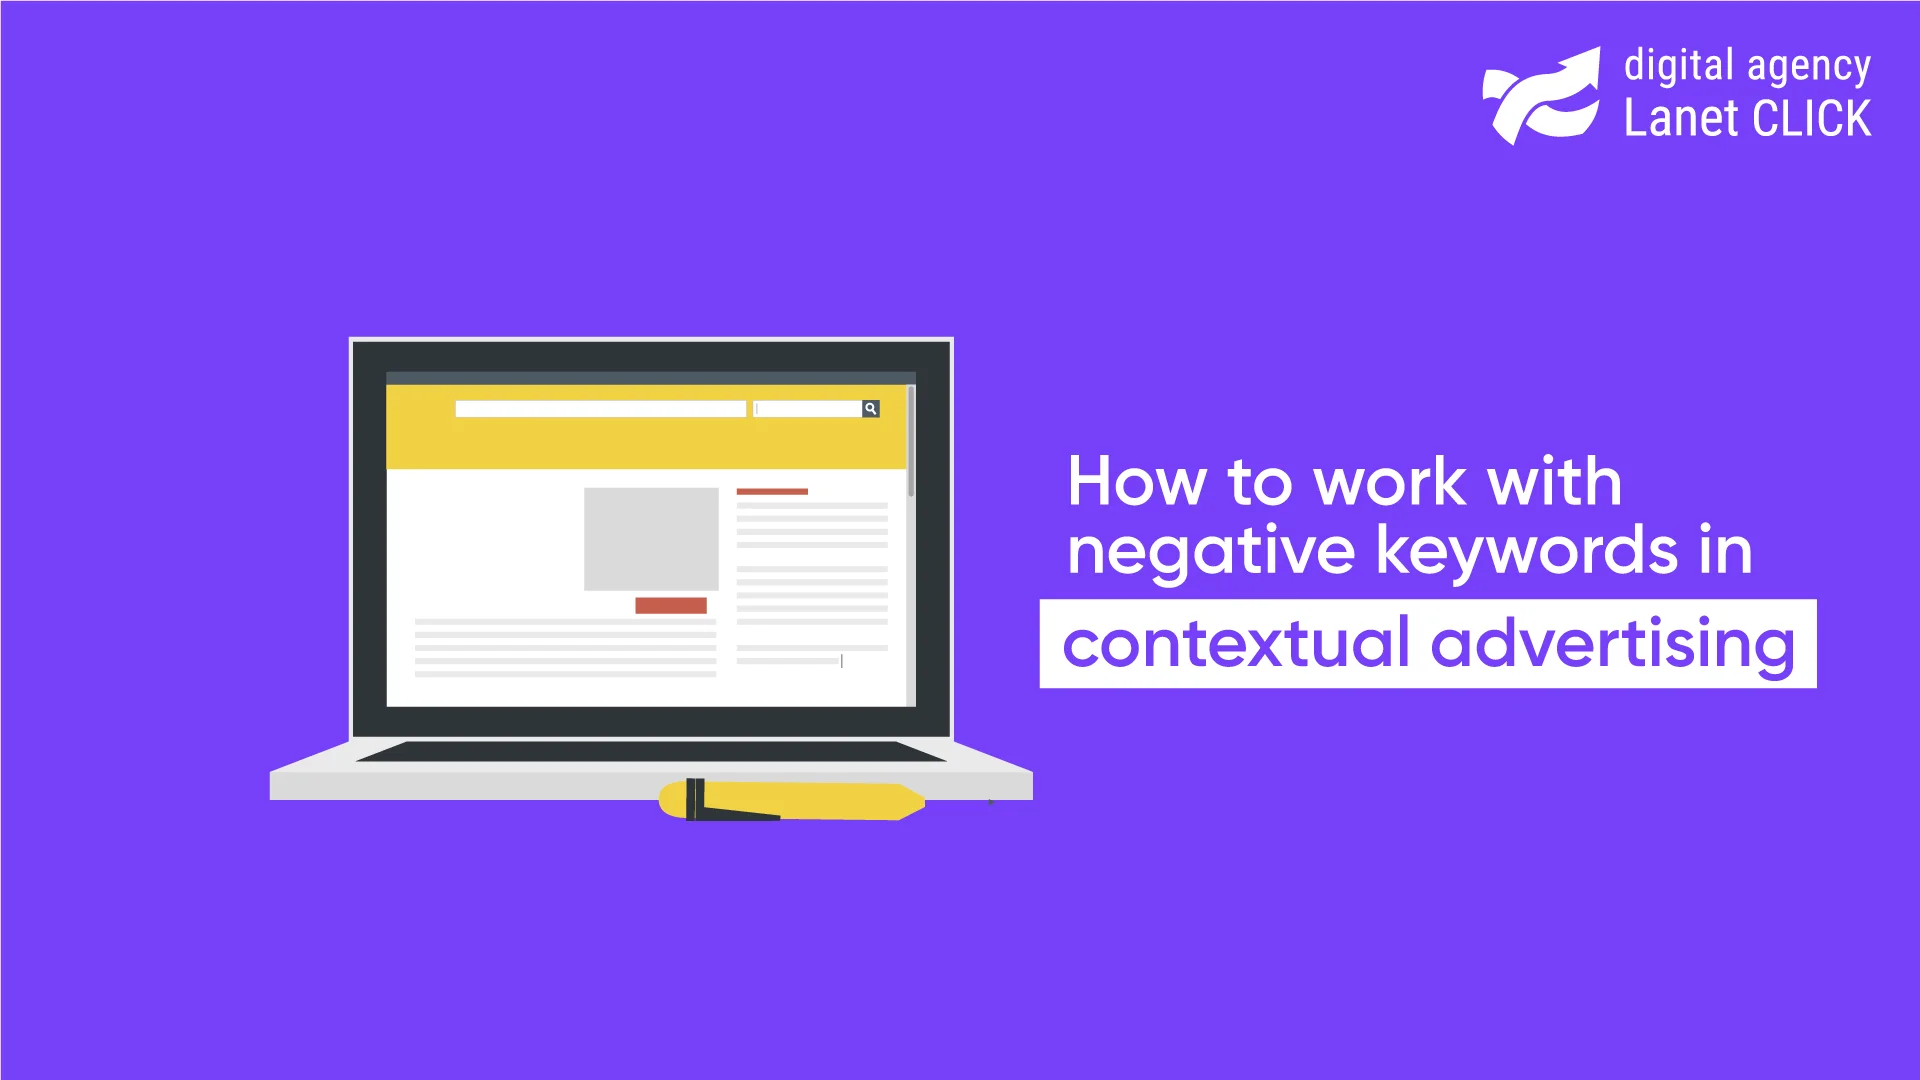 How to work with negative keywords in contextual advertising